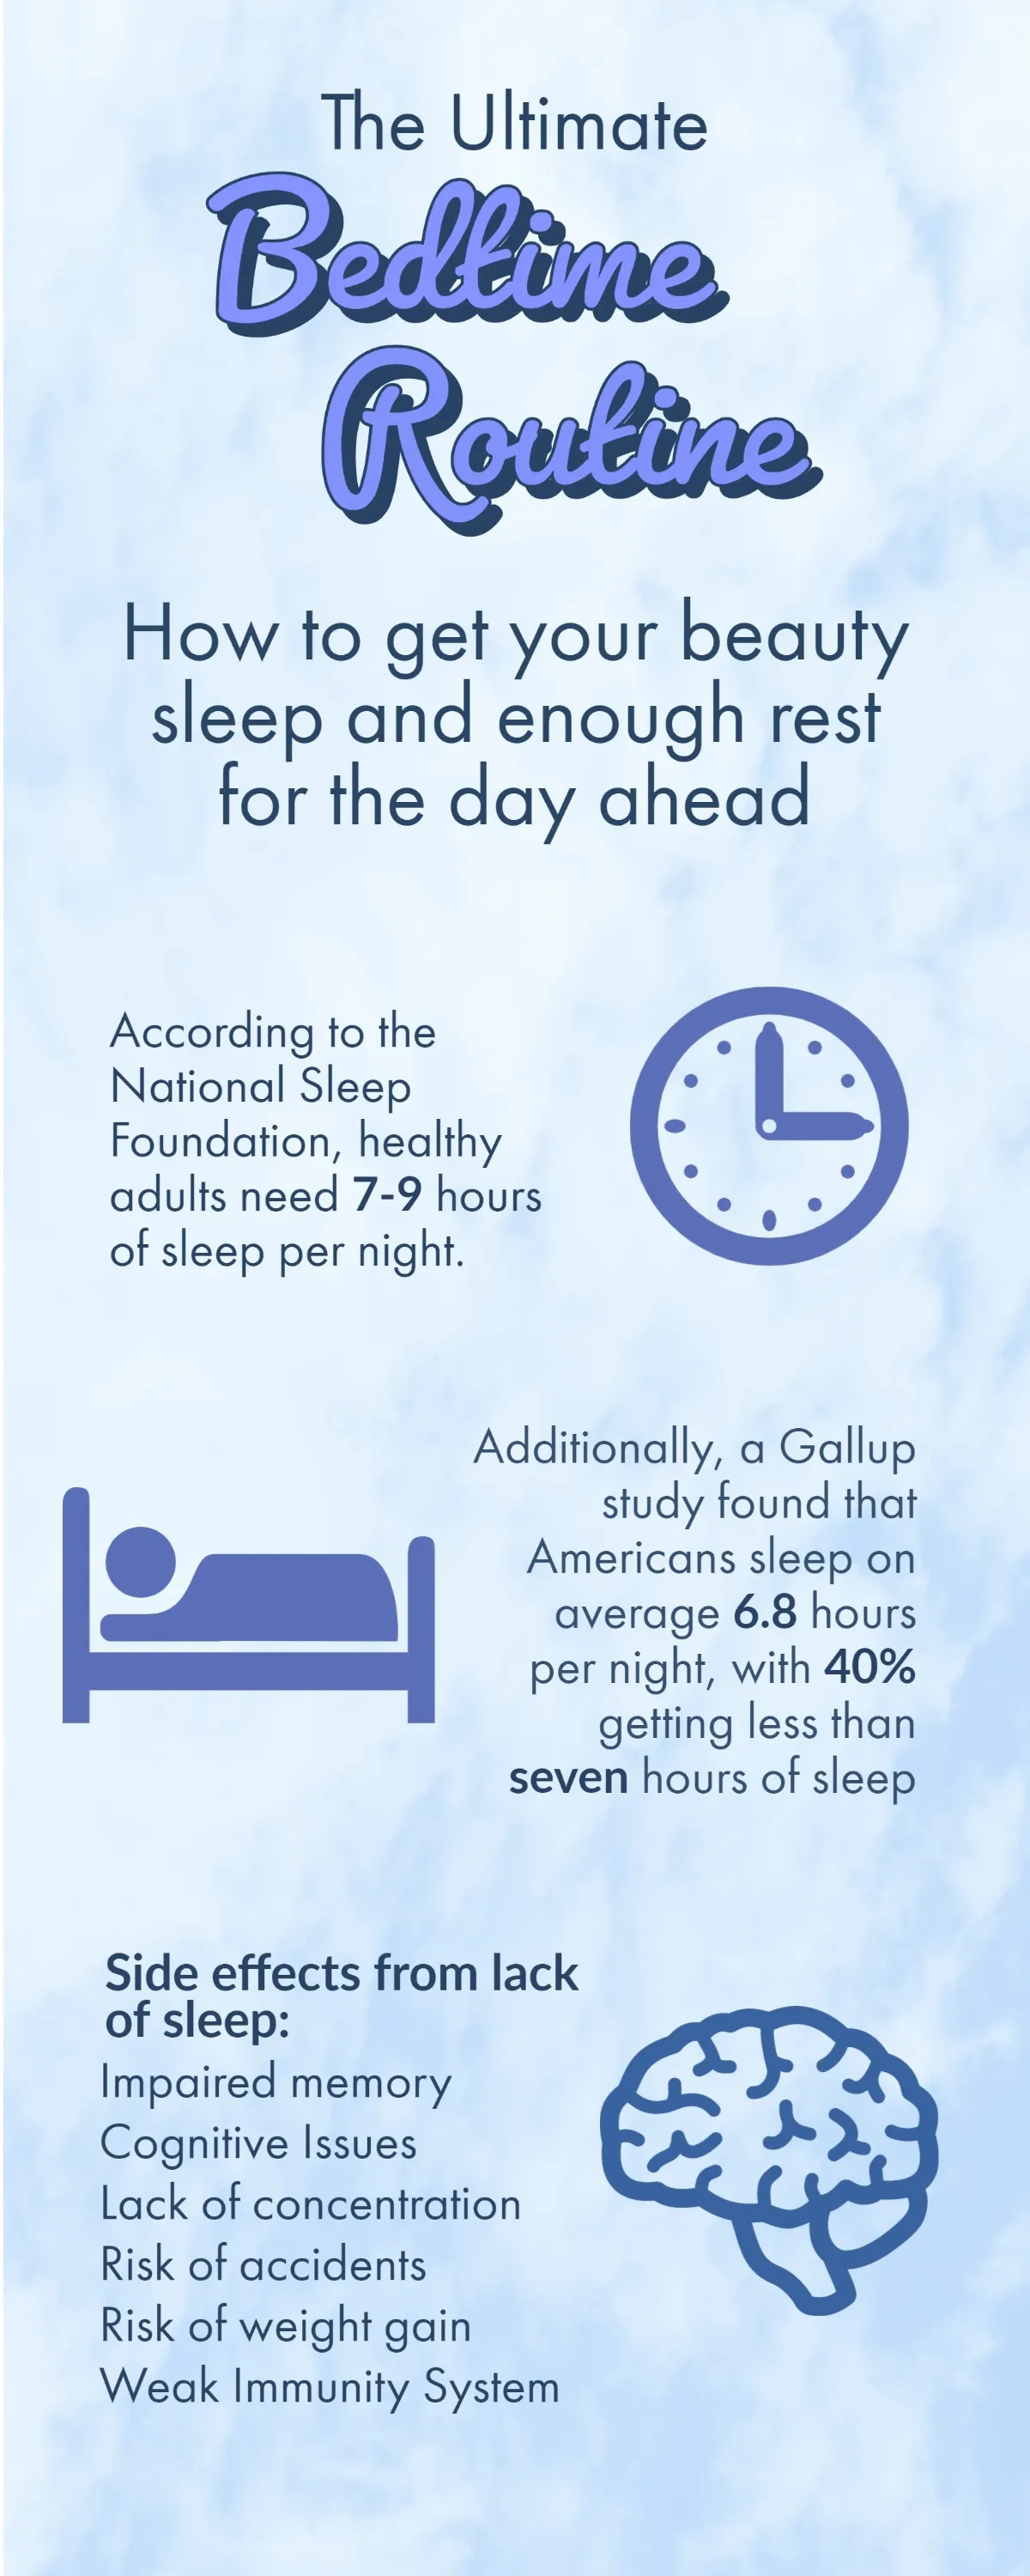 Blue and White Bedtime Routine Infographic